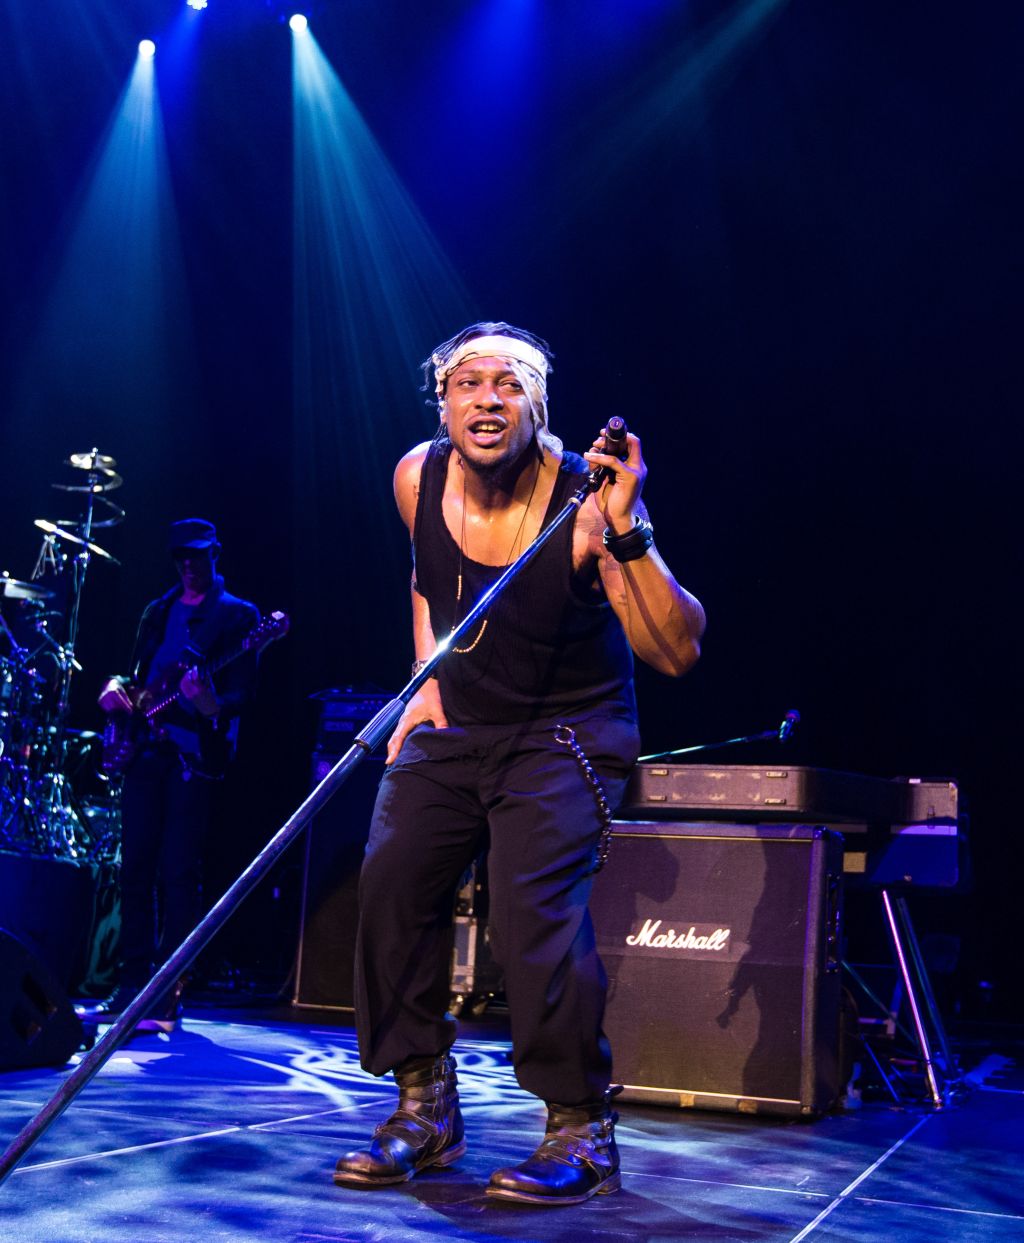 D'Angelo and The Vanguard perform live at The Chelsea